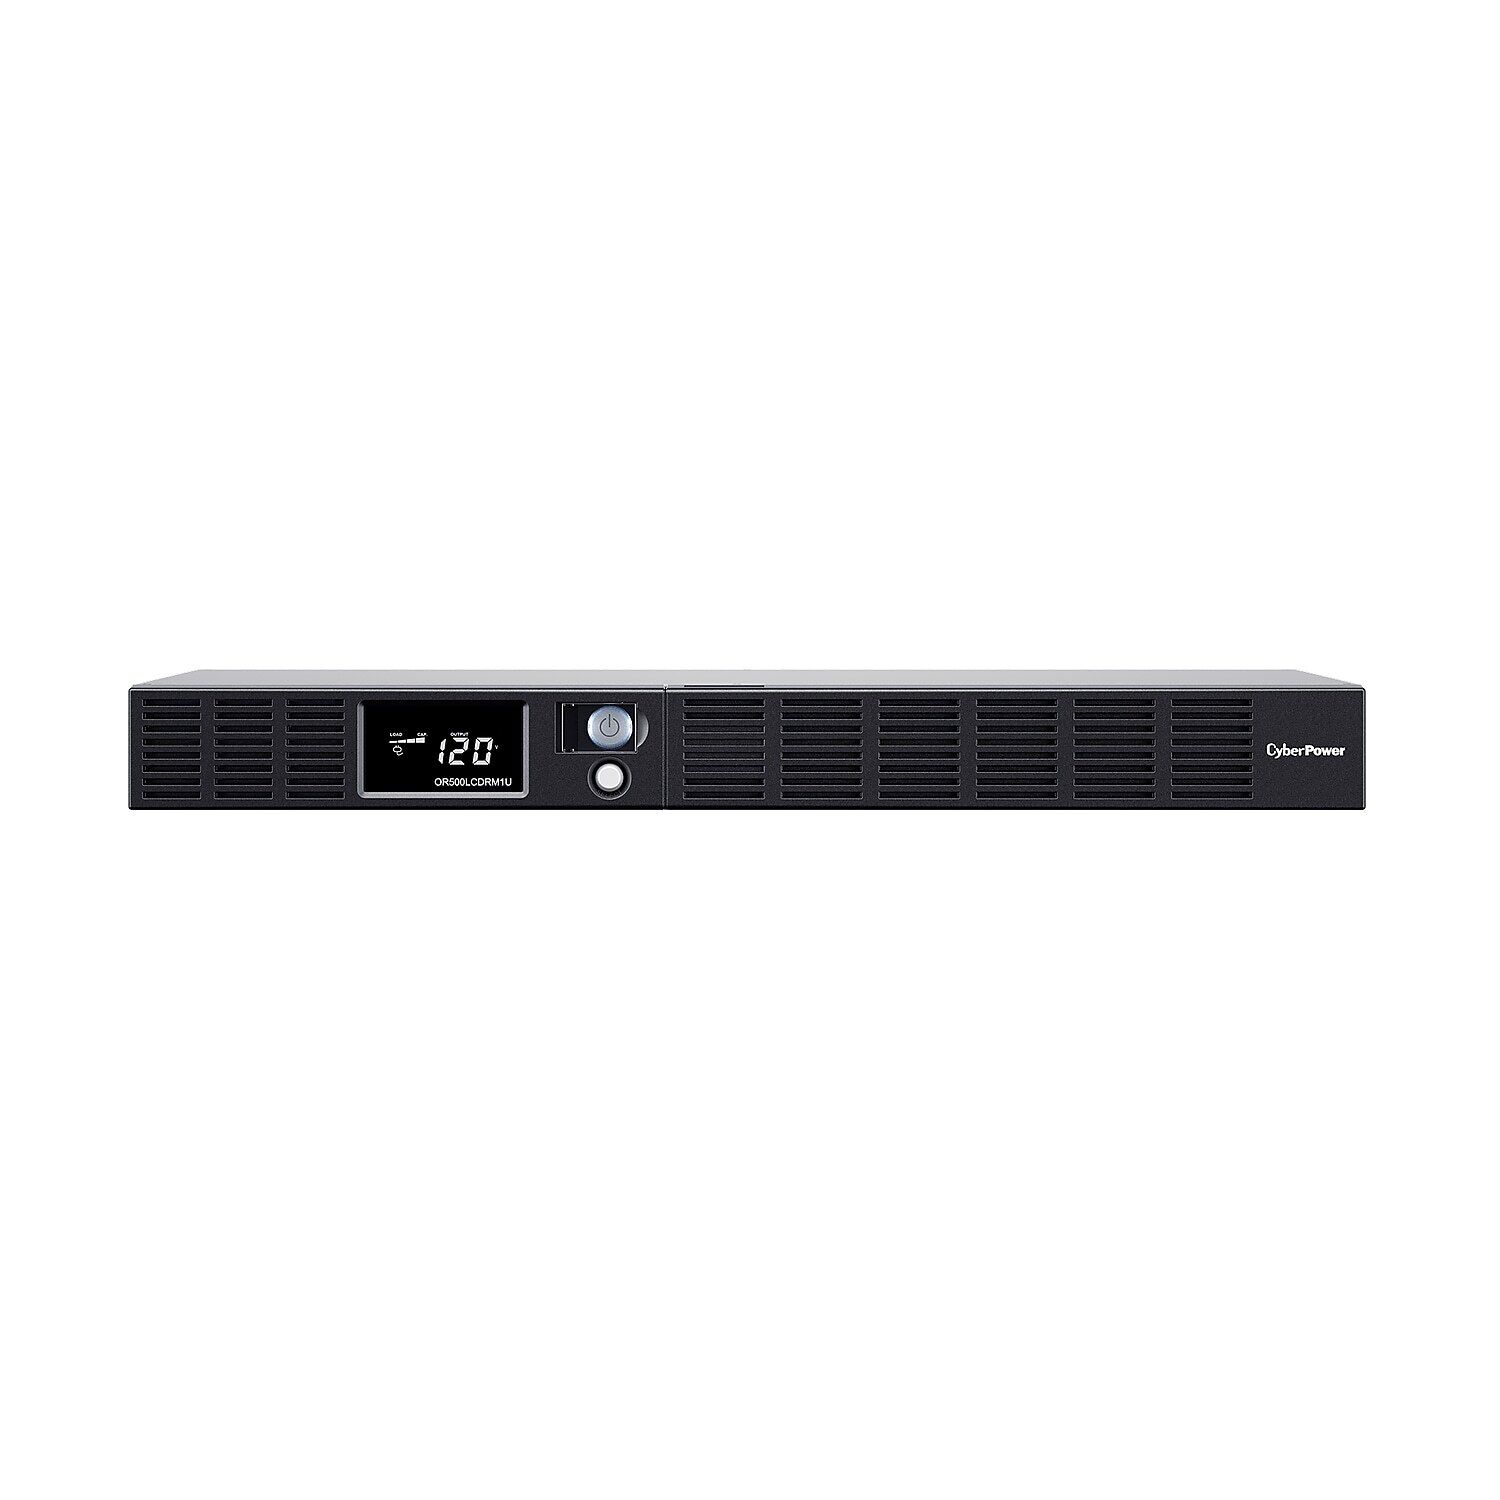 CyberPower Office Rackmount LCD Series 500VA UPS 6-Outlets Black OR500LCDRM1U